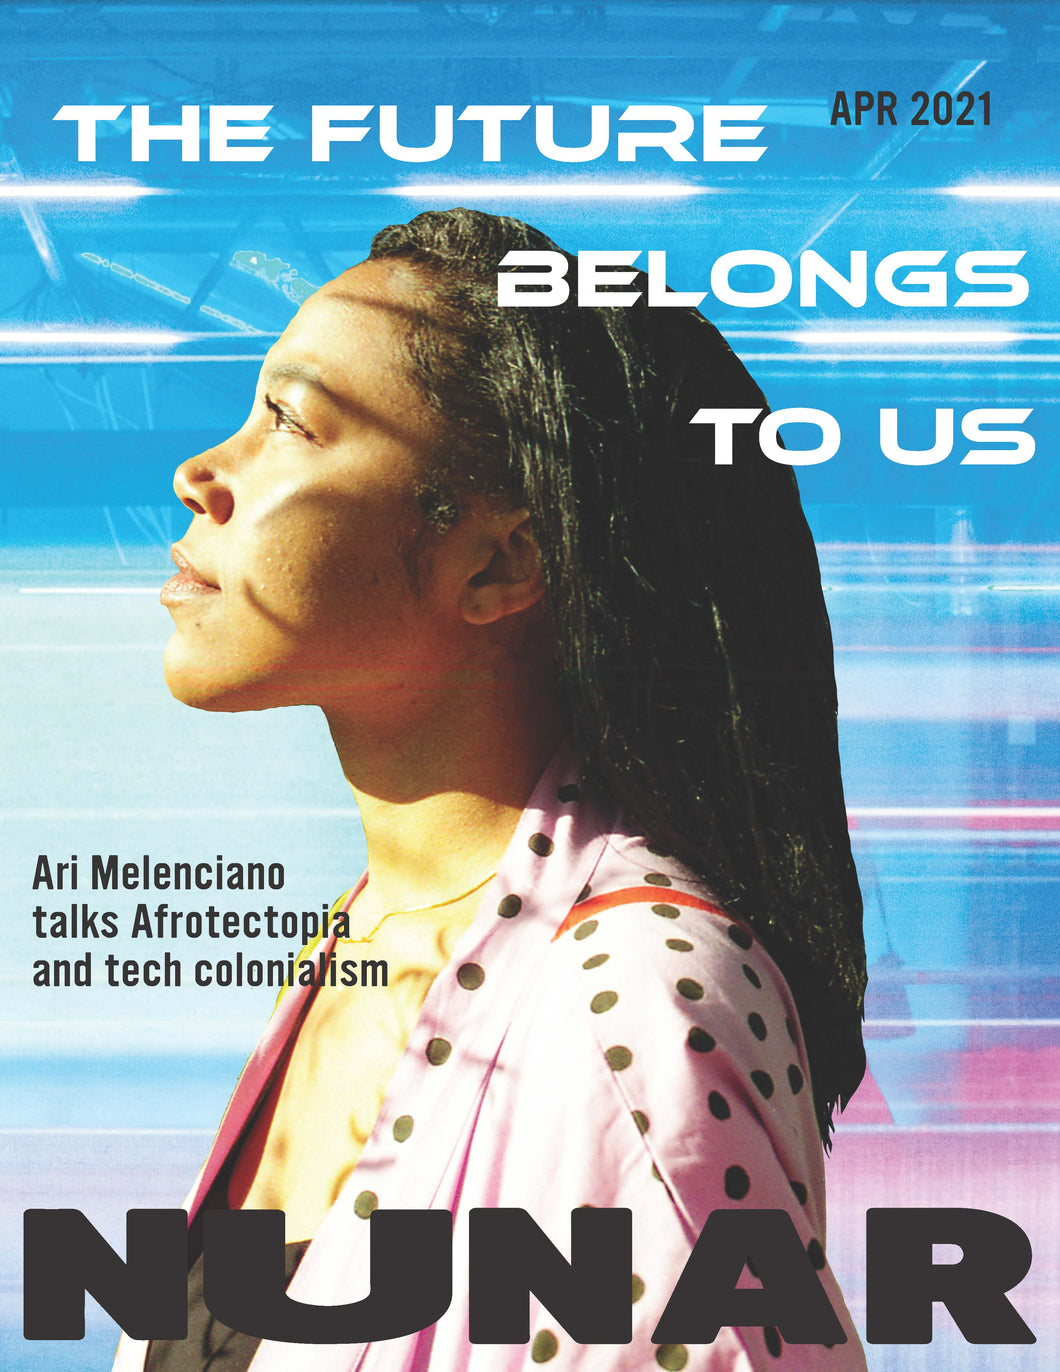 APR 2021 Issue (DIGITAL) - Ari Melenciano Reminds Us That the Future Belongs to Us